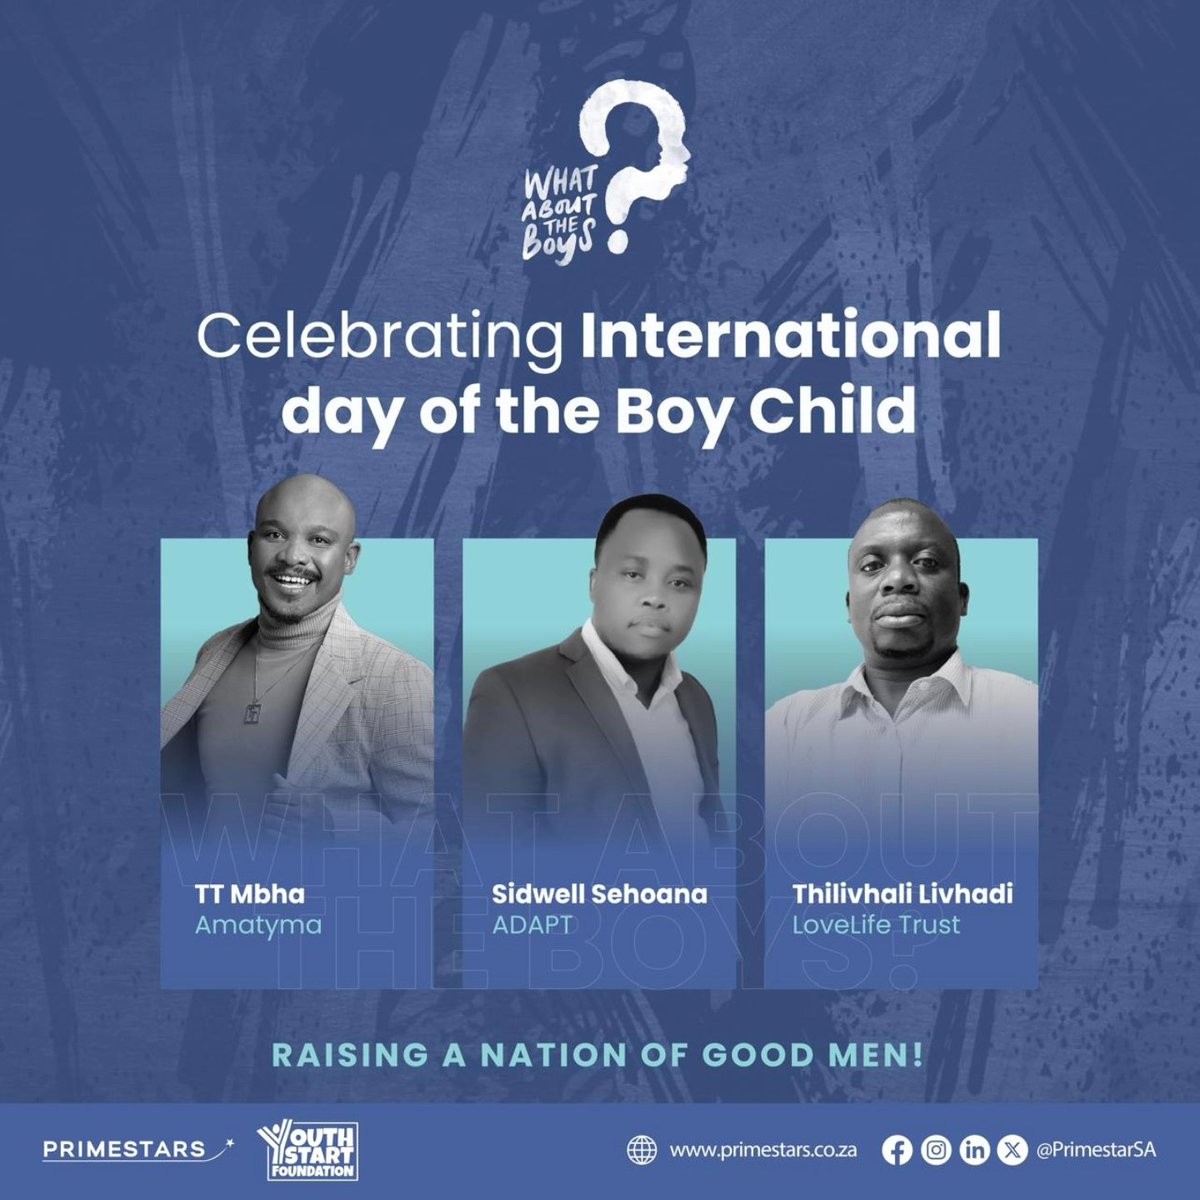 HAPPY INTERNATIONAL BOYS' DAY‼️ 

IF WE EDUCATE OUR SONS, WE WON'T HAVE TO PROTECT OUR DAUGHTERS❤️❤️ 

youtube.com/@AMATYMA

RAISING A NATION OF G❤️❤️D MEN. BE ONE OF THEM‼️

#AMATYMA #WHATABOUTTHEBOYS